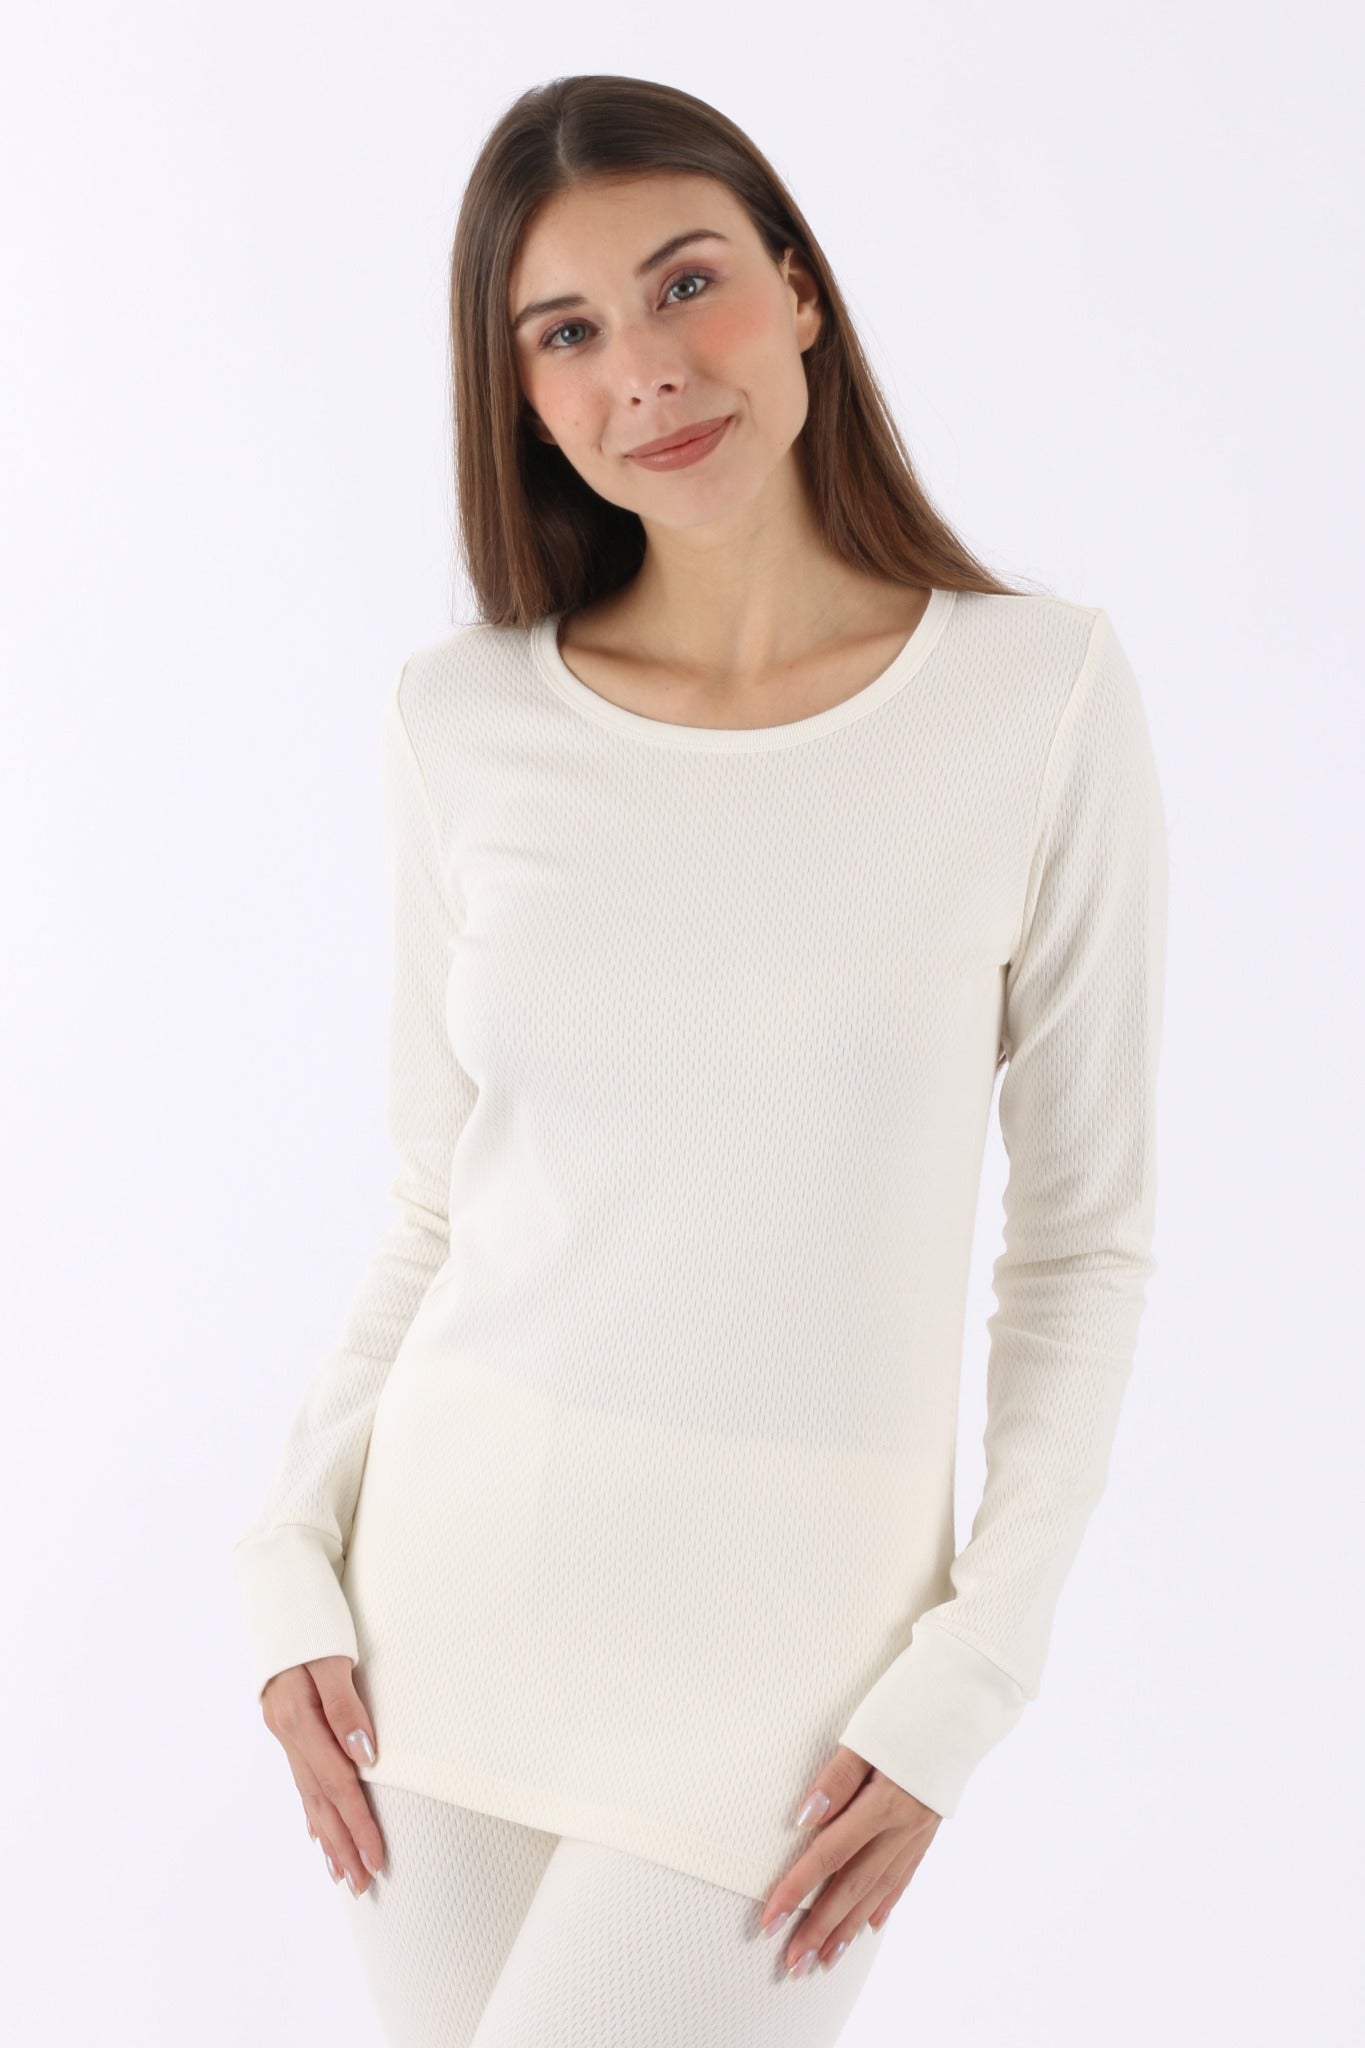 Allergy-free Women's Thermal Long Sleeve ( Natural ) – Cottonique -  Allergy-free Apparel